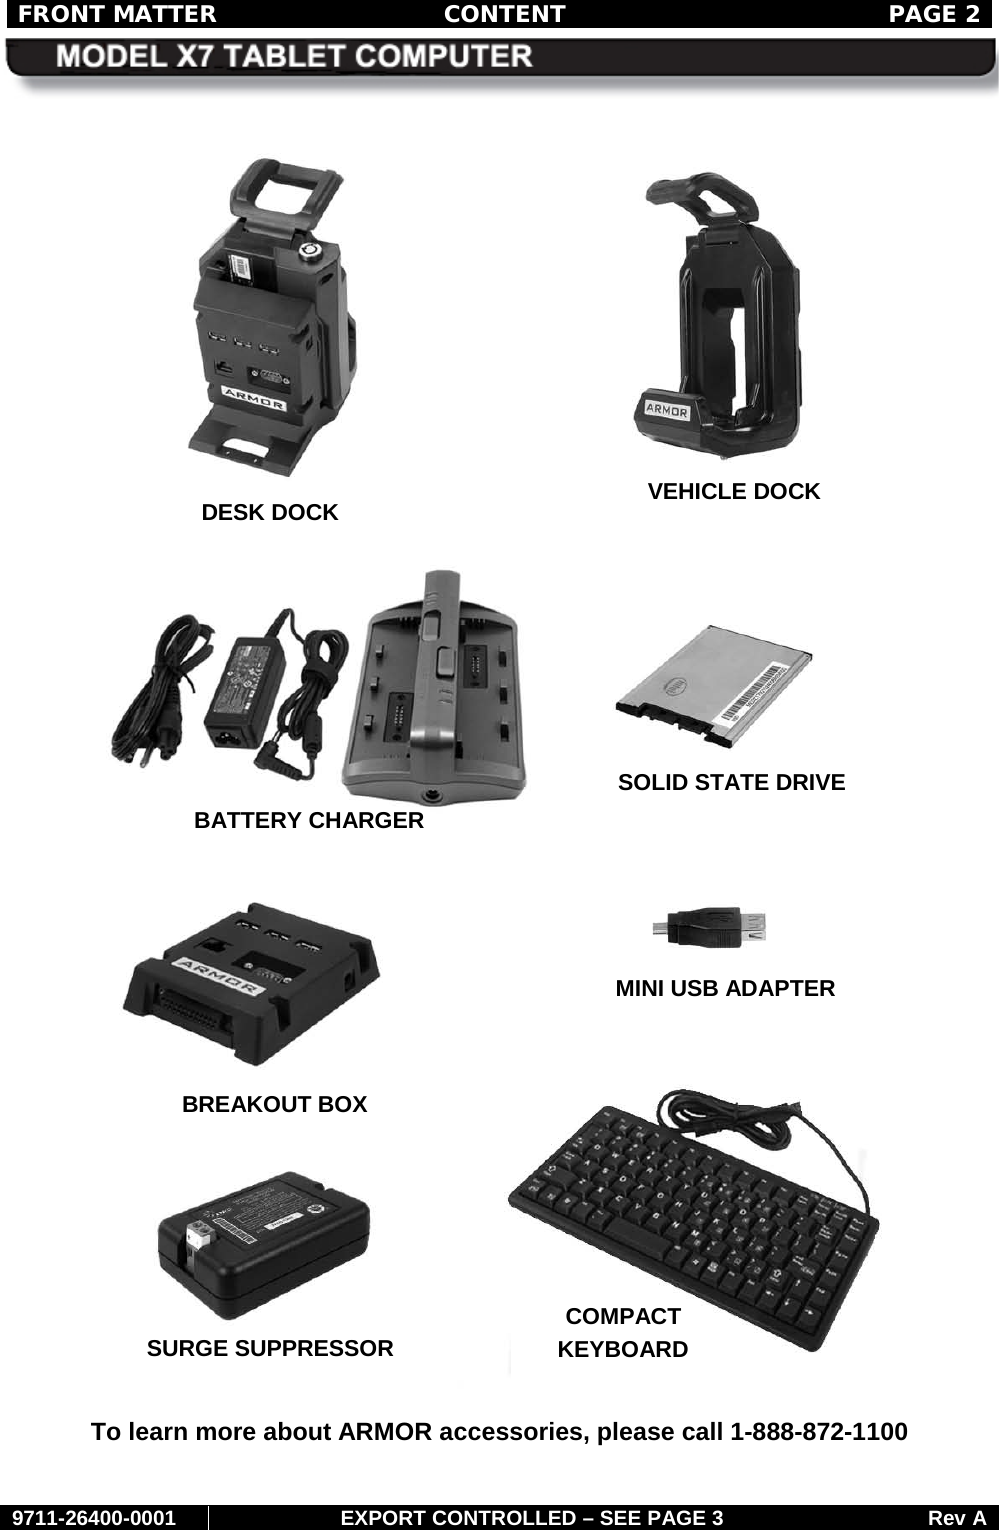 FRONT MATTER CONTENT  PAGE 2     9711-26400-0001 EXPORT CONTROLLED – SEE PAGE 3 Rev A   To learn more about ARMOR accessories, please call 1-888-872-1100 VEHICLE DOCK DESK DOCK BATTERY CHARGER SOLID STATE DRIVE MINI USB ADAPTER BREAKOUT BOX SURGE SUPPRESSOR COMPACT  KEYBOARD 